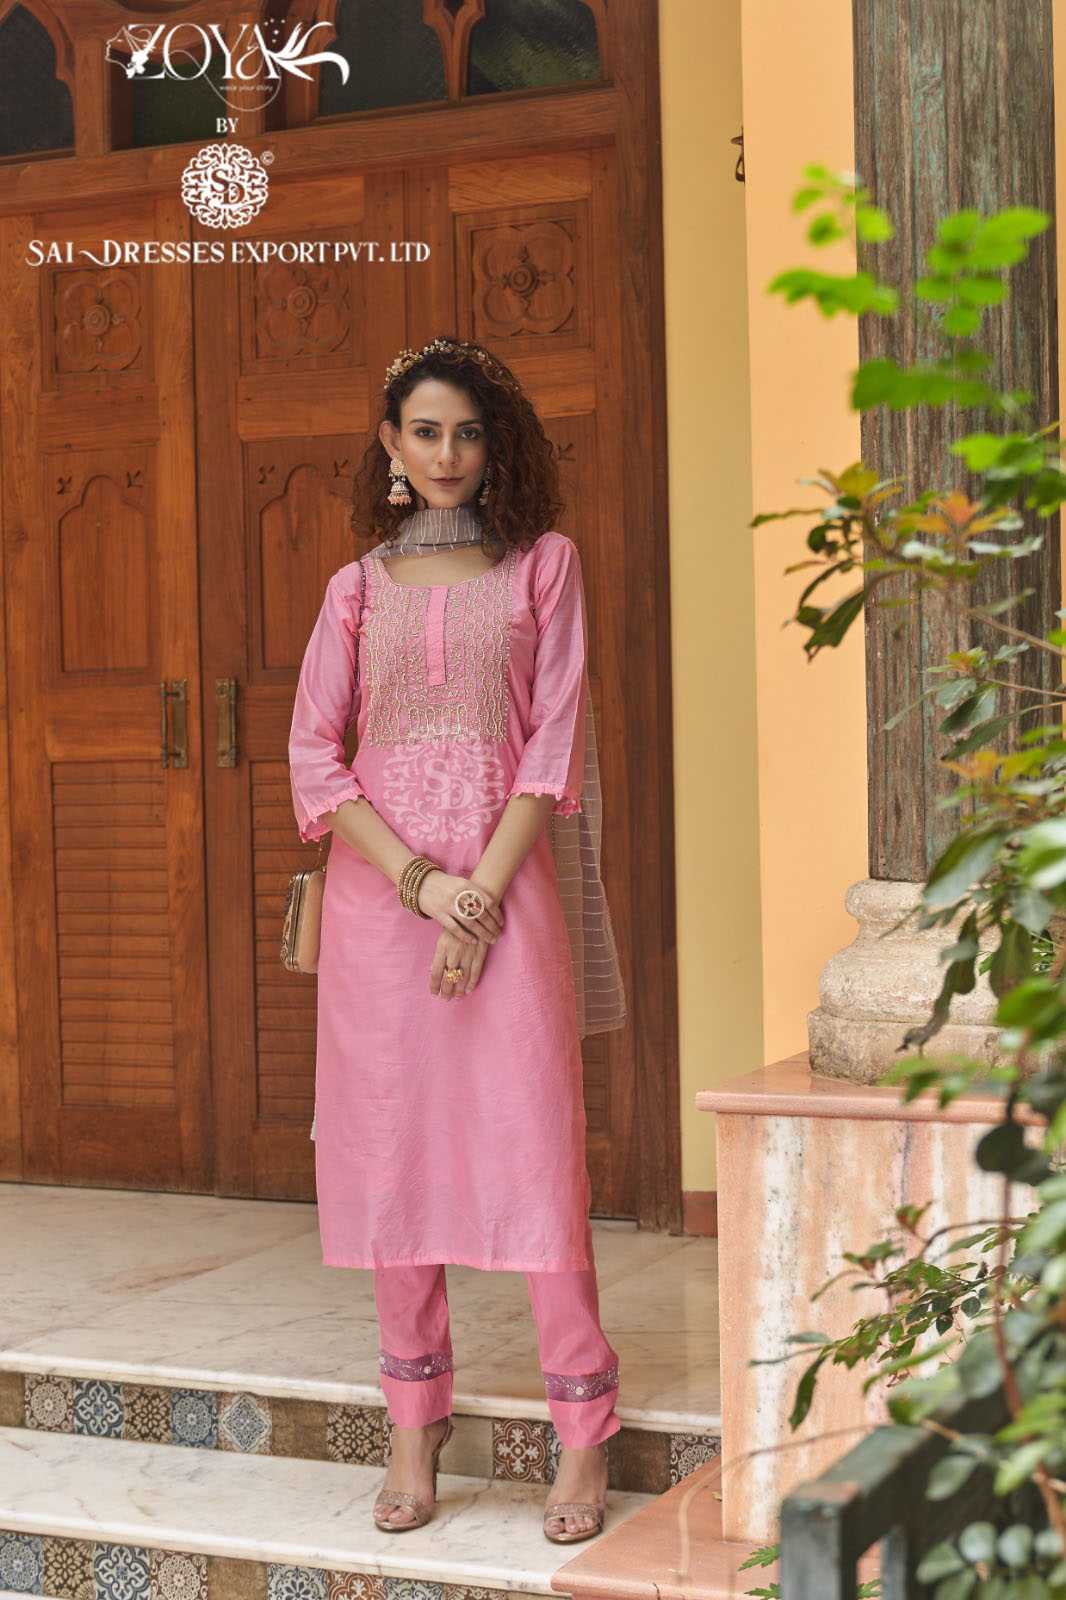 SAI DRESSES PRESENT MUSKAAN READY TO FESTIVE WEAR HANDWORK STRAIGHT CUT KURTI WITH PANT STYLE DESIGNER 3 PIECE SUITS IN WHOLESALE RATE IN SURAT